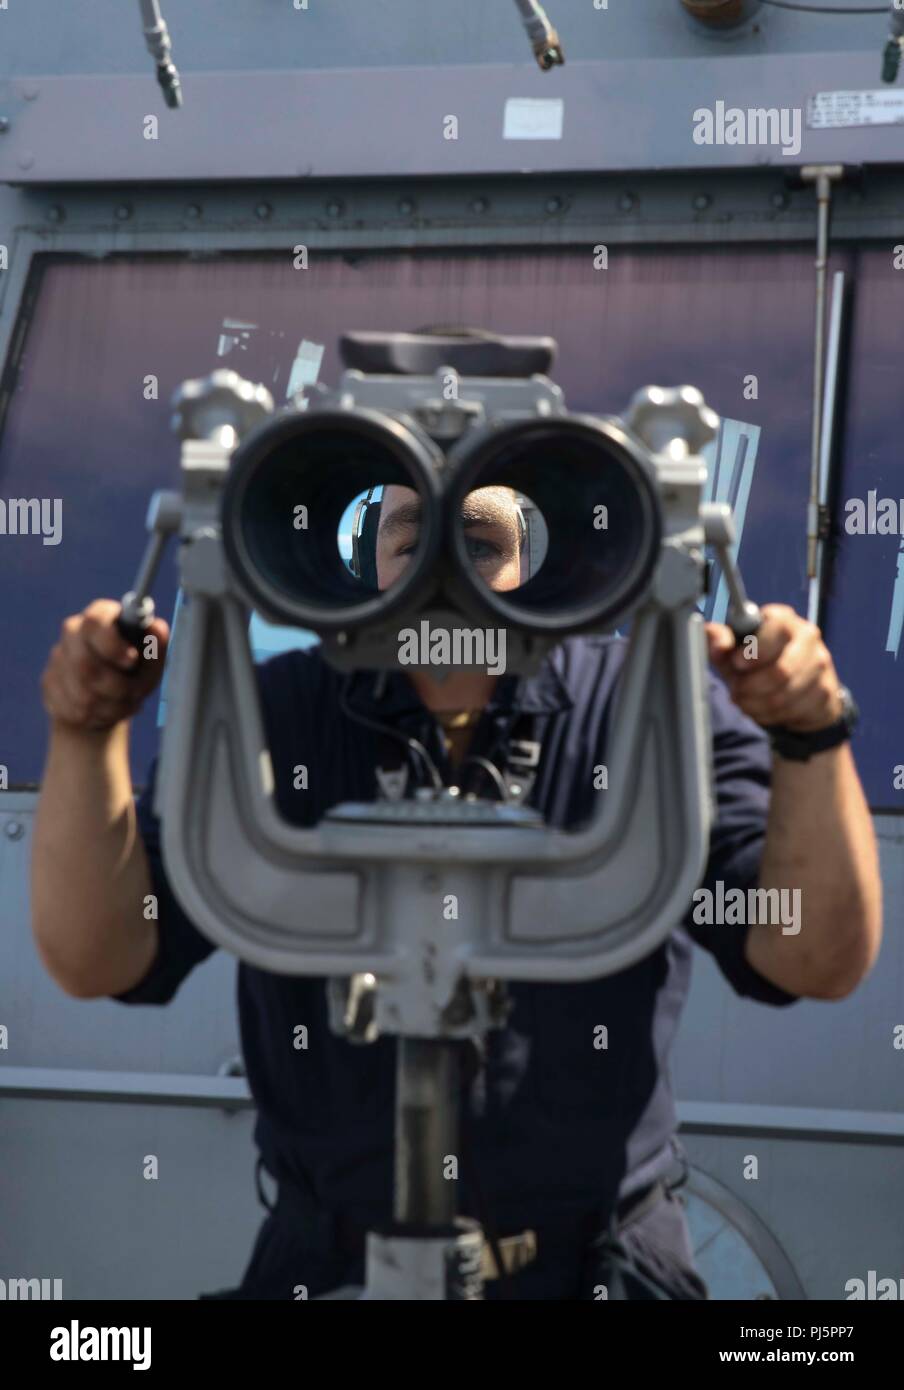 180825-N-HG389-0026 ATLANTIC OCEAN (Aug. 25, 2018) Seaman Andrew Pierce looks through the “big eyes” binoculars on the bridge wing of amphibious transport dock ship USS Arlington (LPD 24) during a visit, board, search and seizure (VBSS) exercise during the Carrier Strike Group FOUR (CSG 4) Amphibious Ready Group, Marine Expeditionary Unit exercise (ARGMEUEX).  Kearsarge Amphibious Ready Group and 22nd Marine Expeditionary Unit are enhancing joint integration, lethality and collective capabilities of the Navy-Marine Corps team through joint planning and execution of challenging and realistic tr Stock Photo